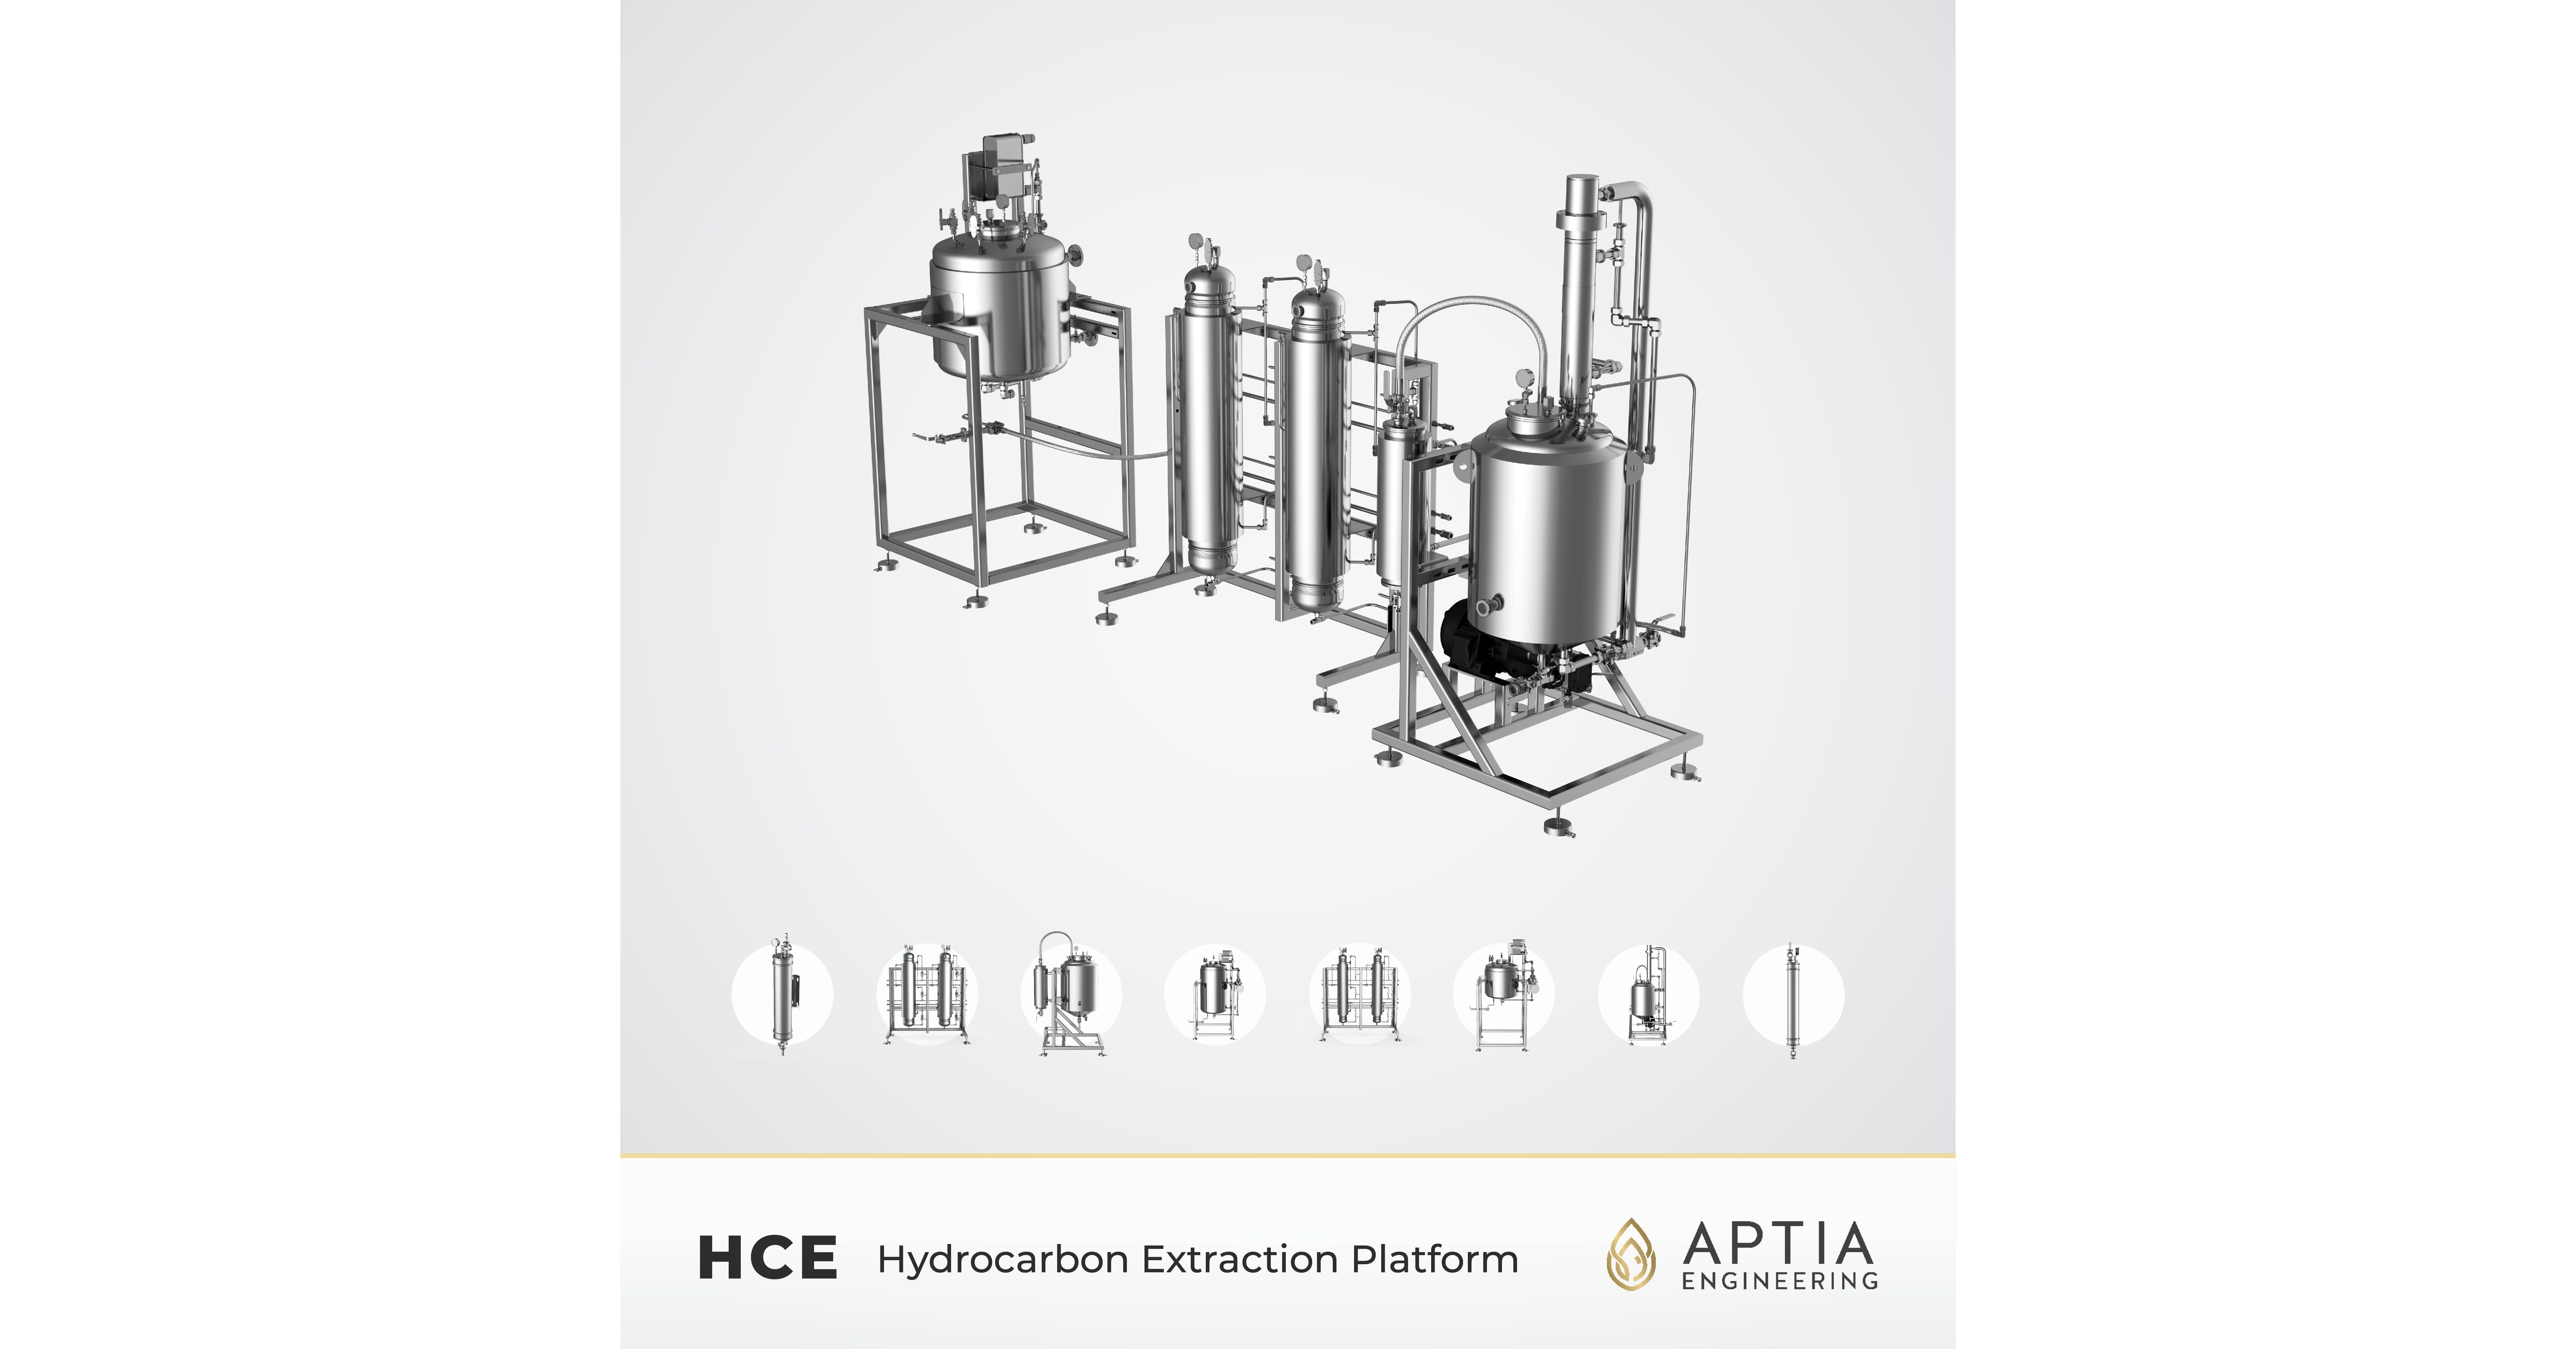 Aptia Engineering’s Intelligent Design Shines with Their Hydrocarbon Extraction Platform